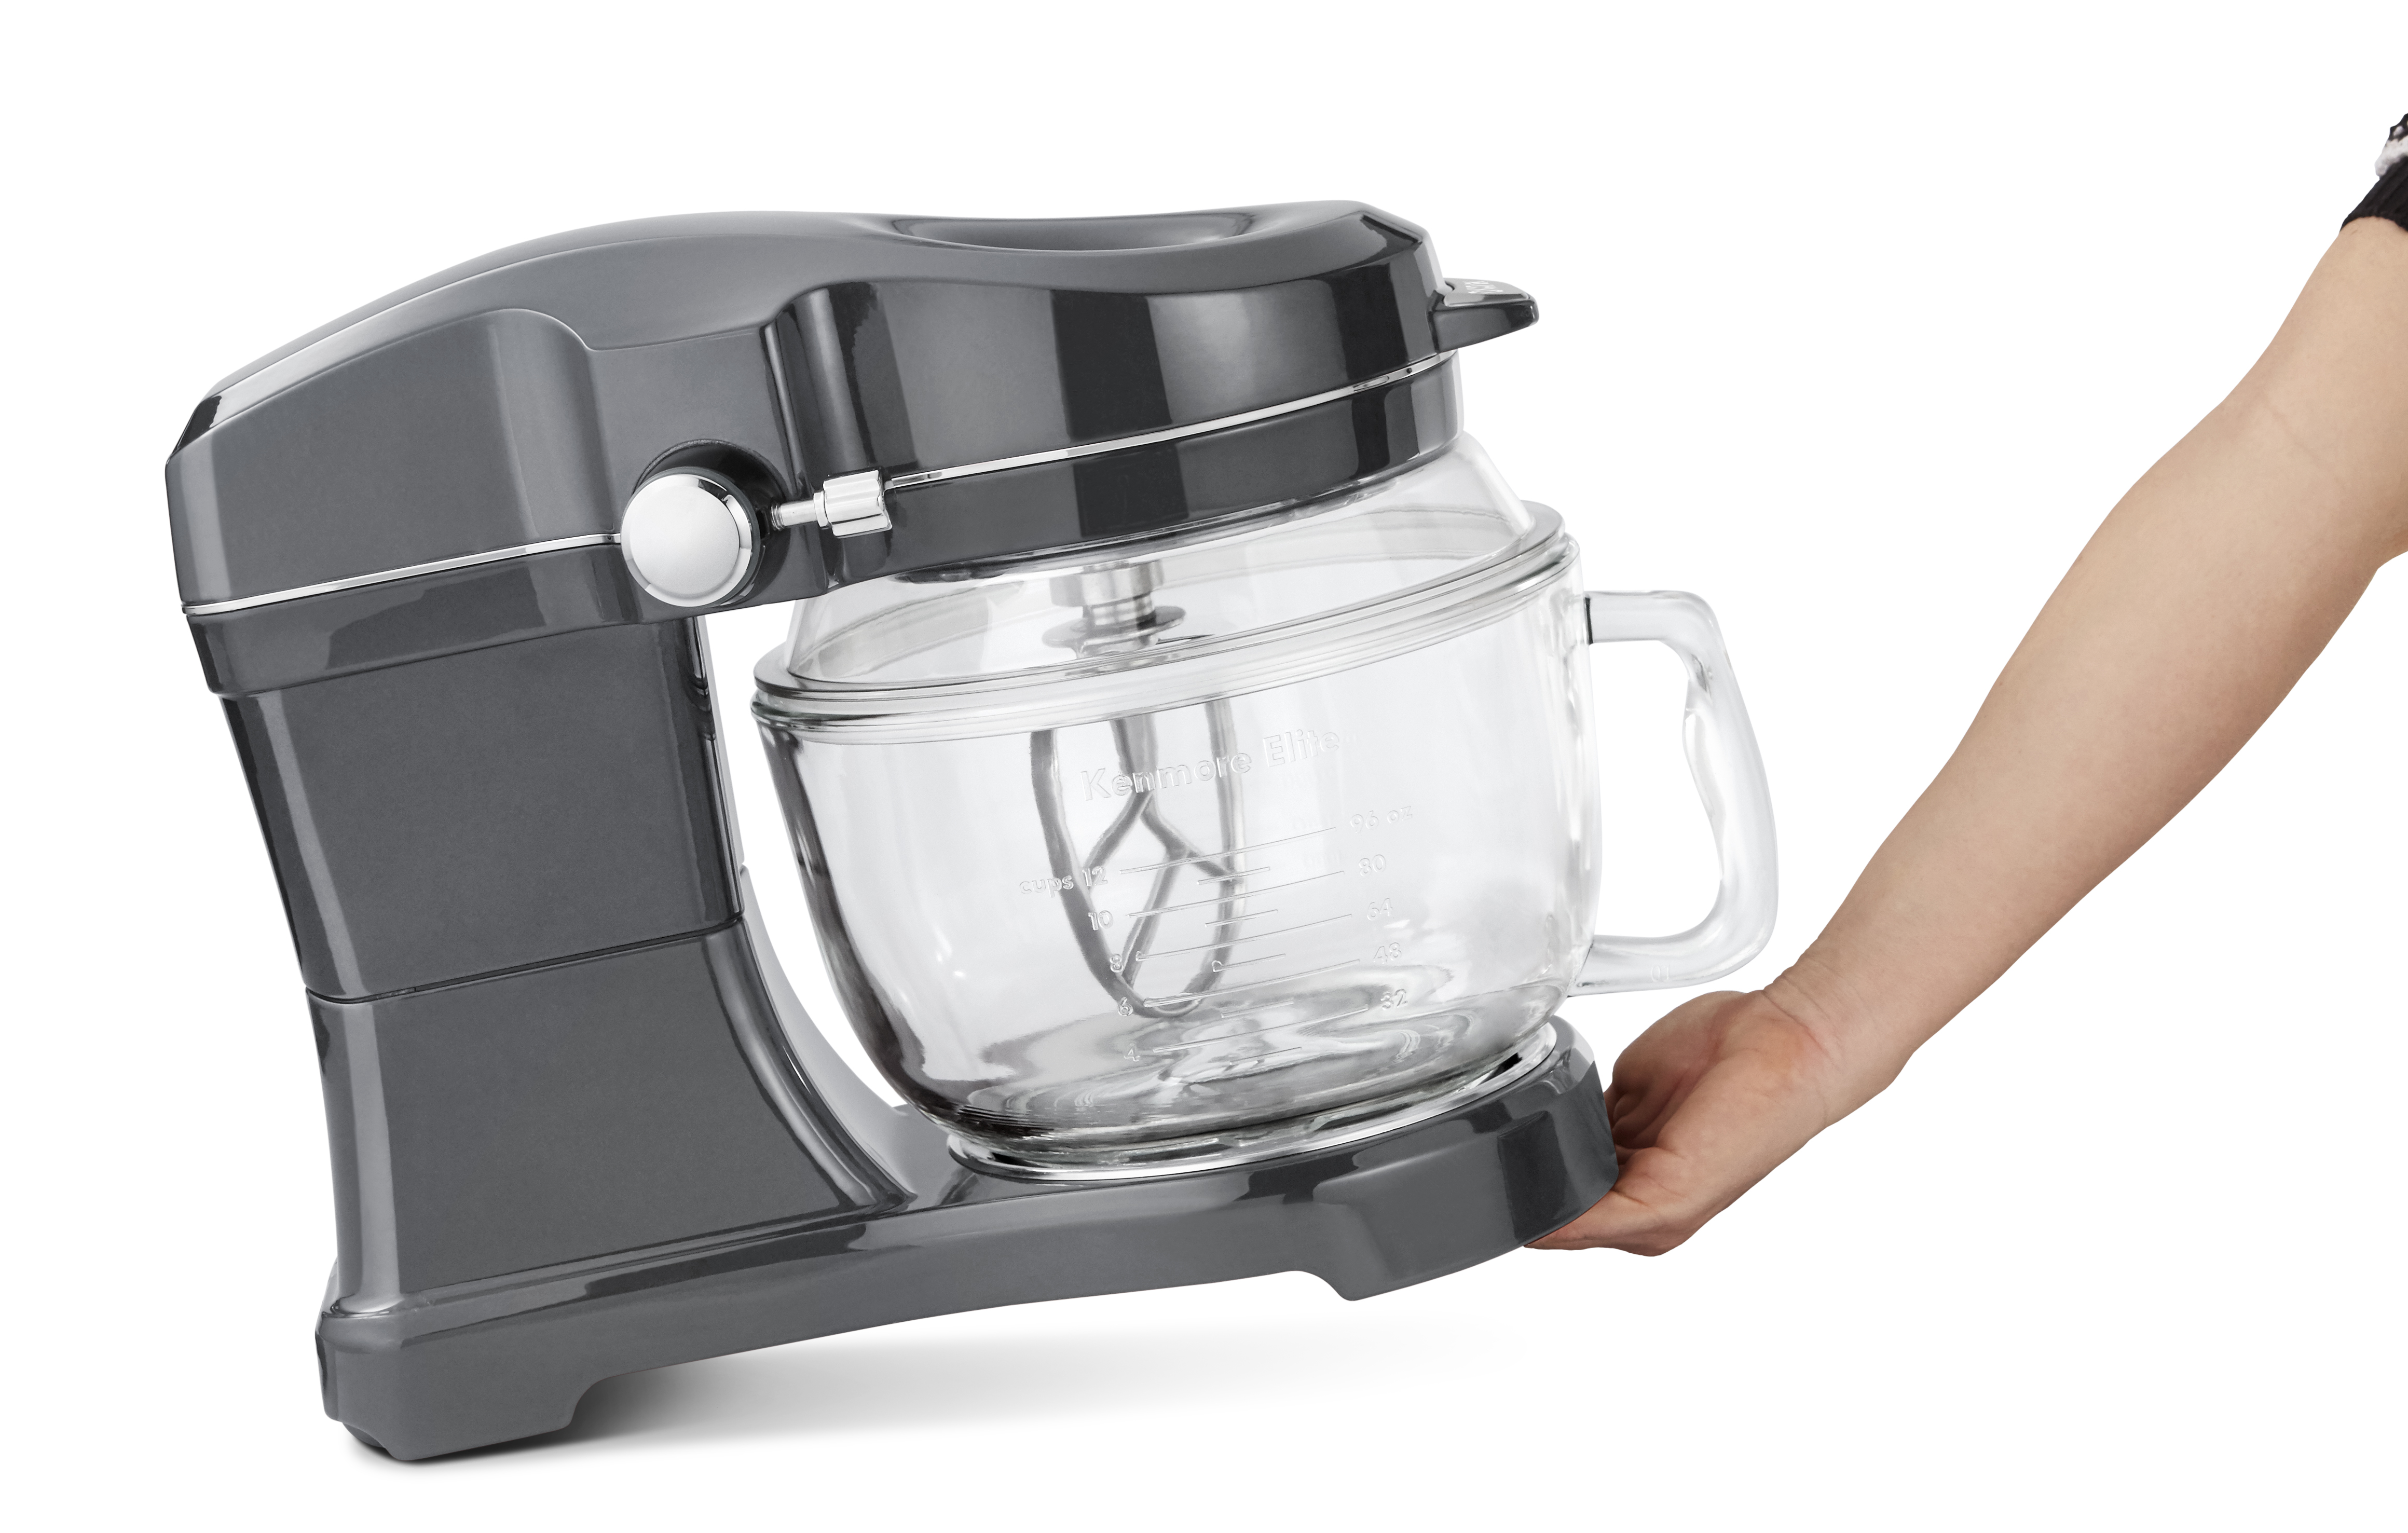 Sears - The Kenmore Elite Ovation stand mixer: ☑️